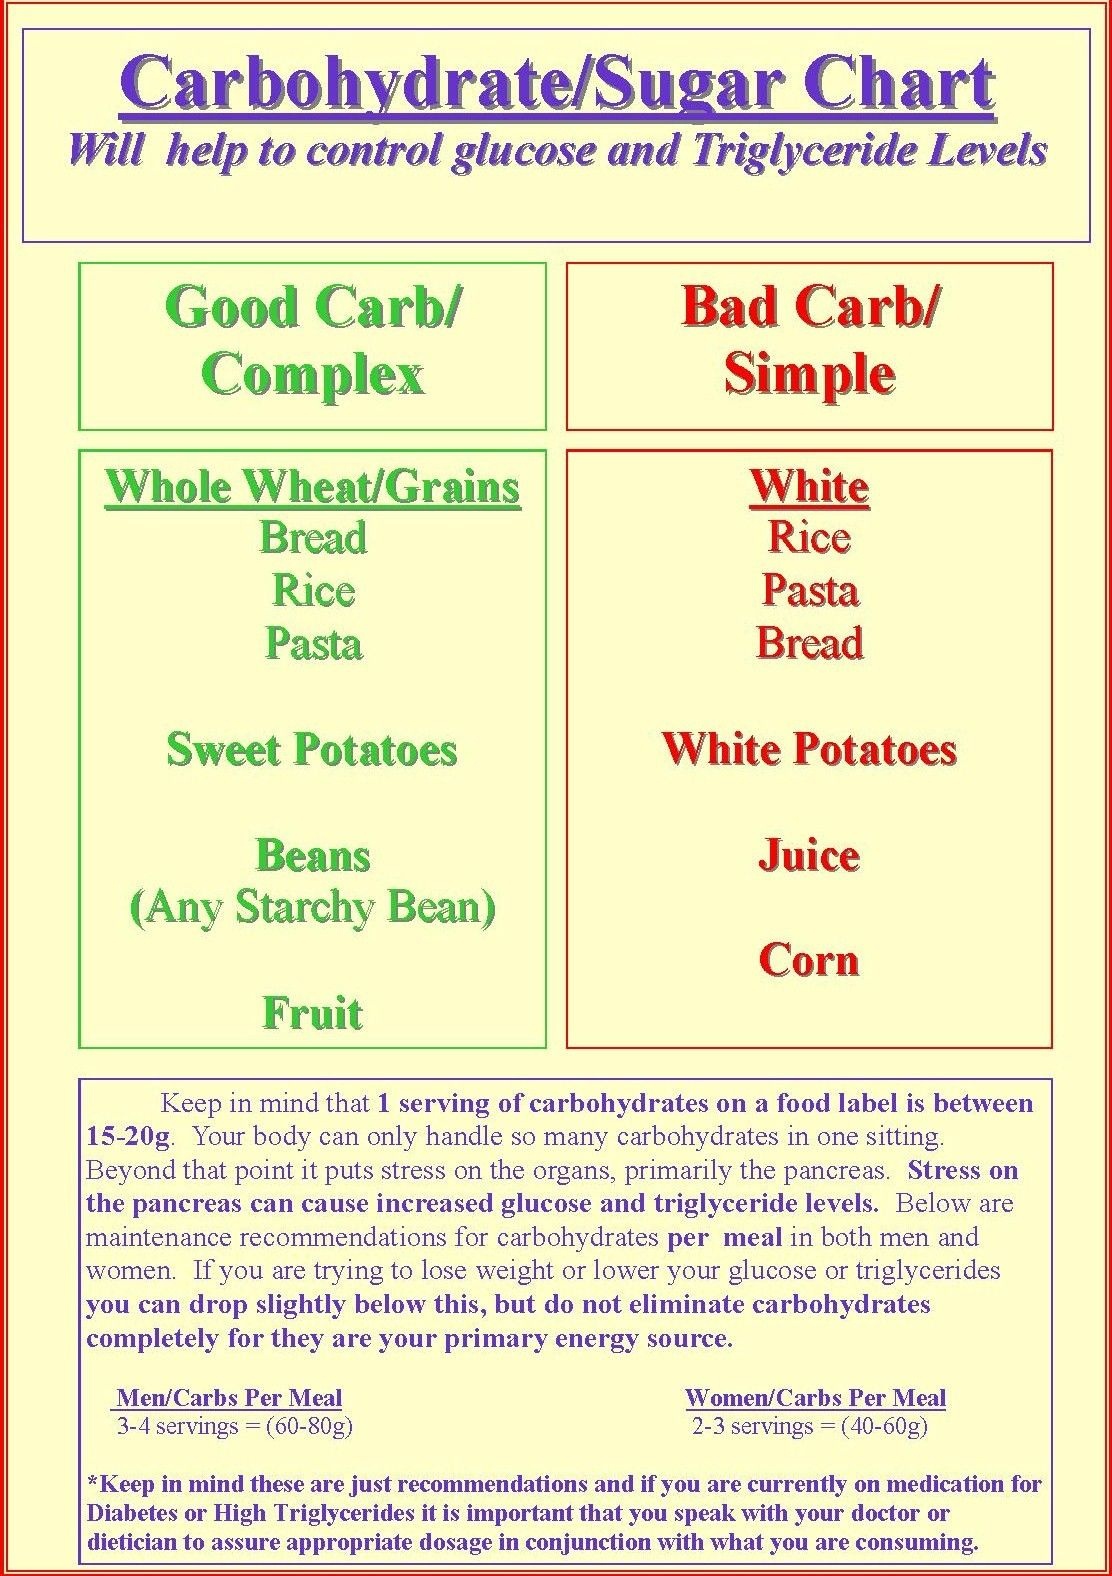 Free Print Carb Counter Chart | Carbohydrate/sugar Chart | Low Carb - Free Printable Carb Counter Chart